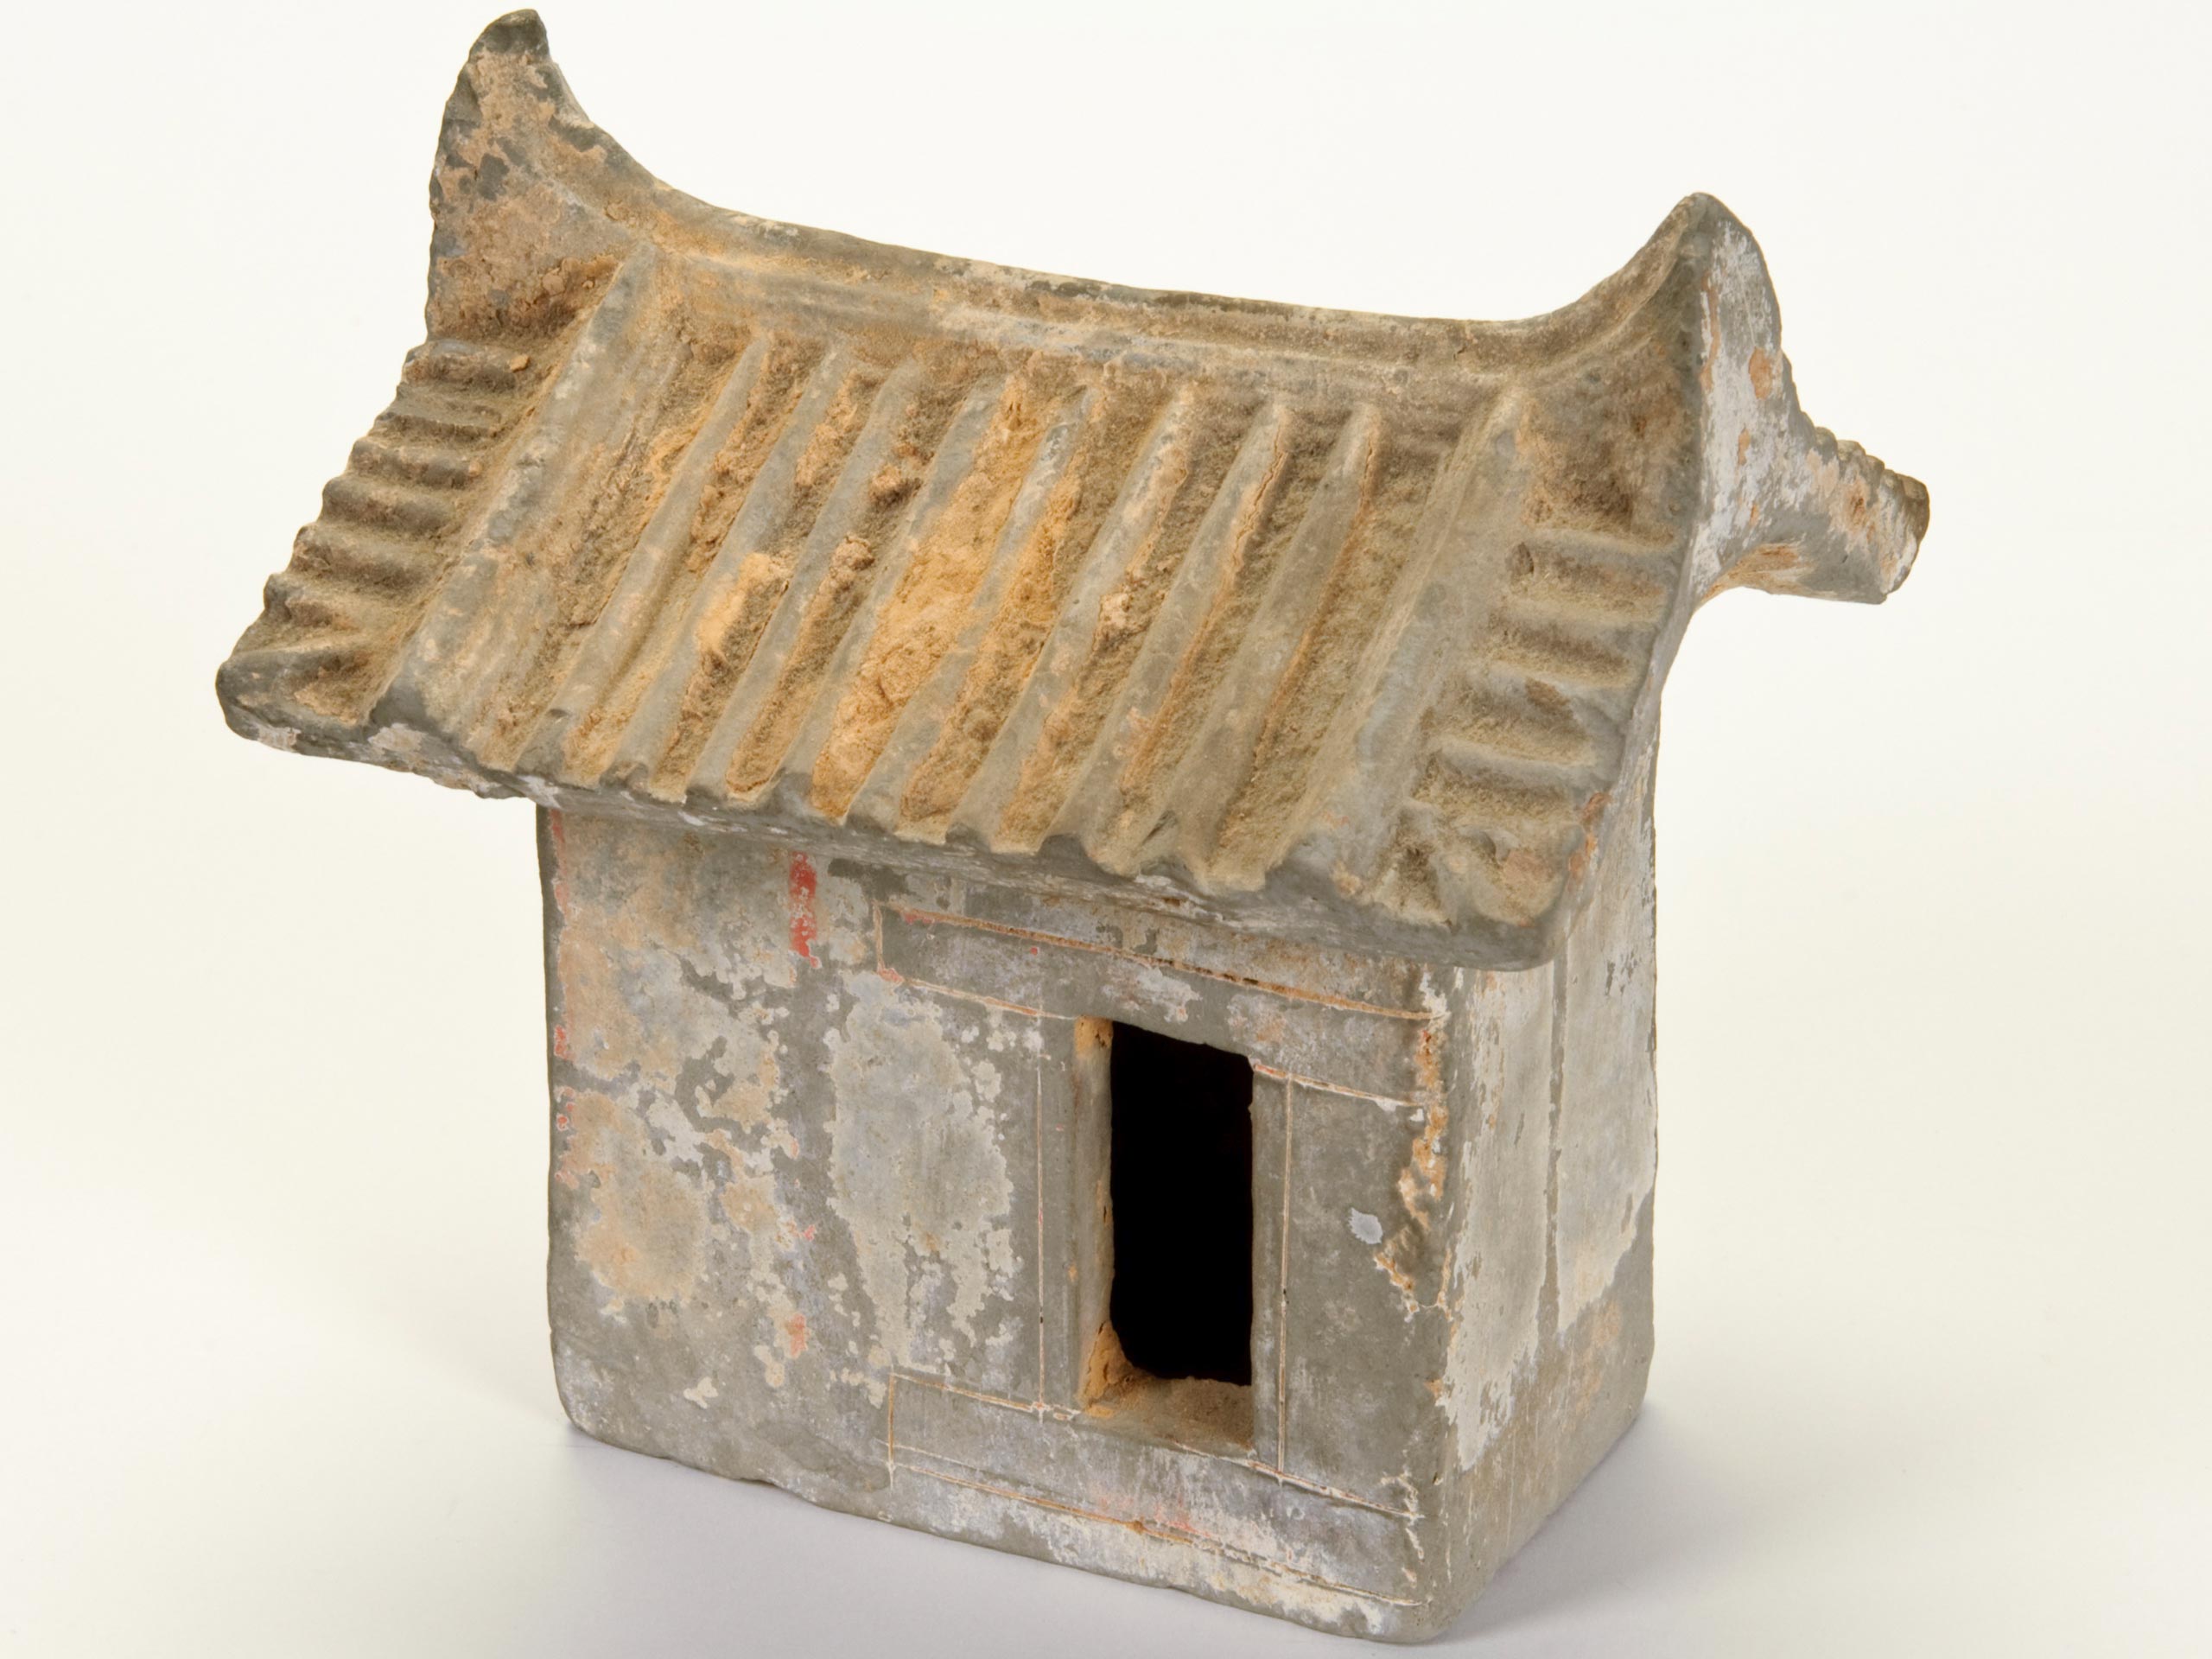 sculptural model of a house